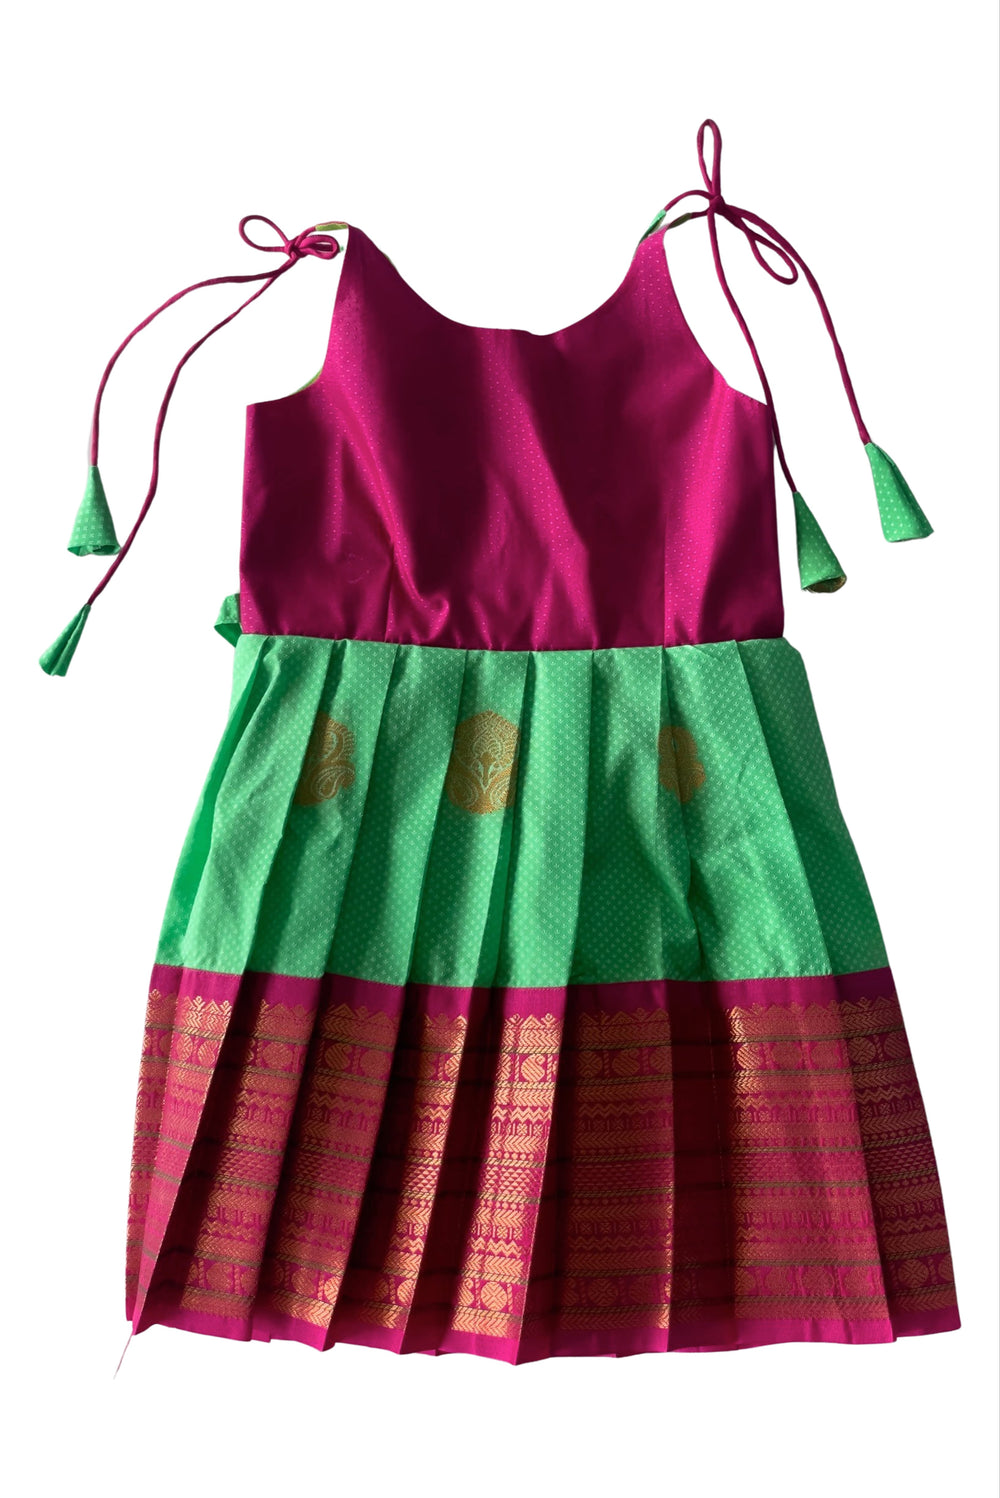 The Nesavu Tie Up Frock Festive Maroon and Emerald Green Silk Tieup frock with Elegant Embroidery Nesavu 14 (6M) / Green / Style 2 T309B-14 Girls' Maroon and Green Embroidered Silk Tieup Frock | The Nesavu